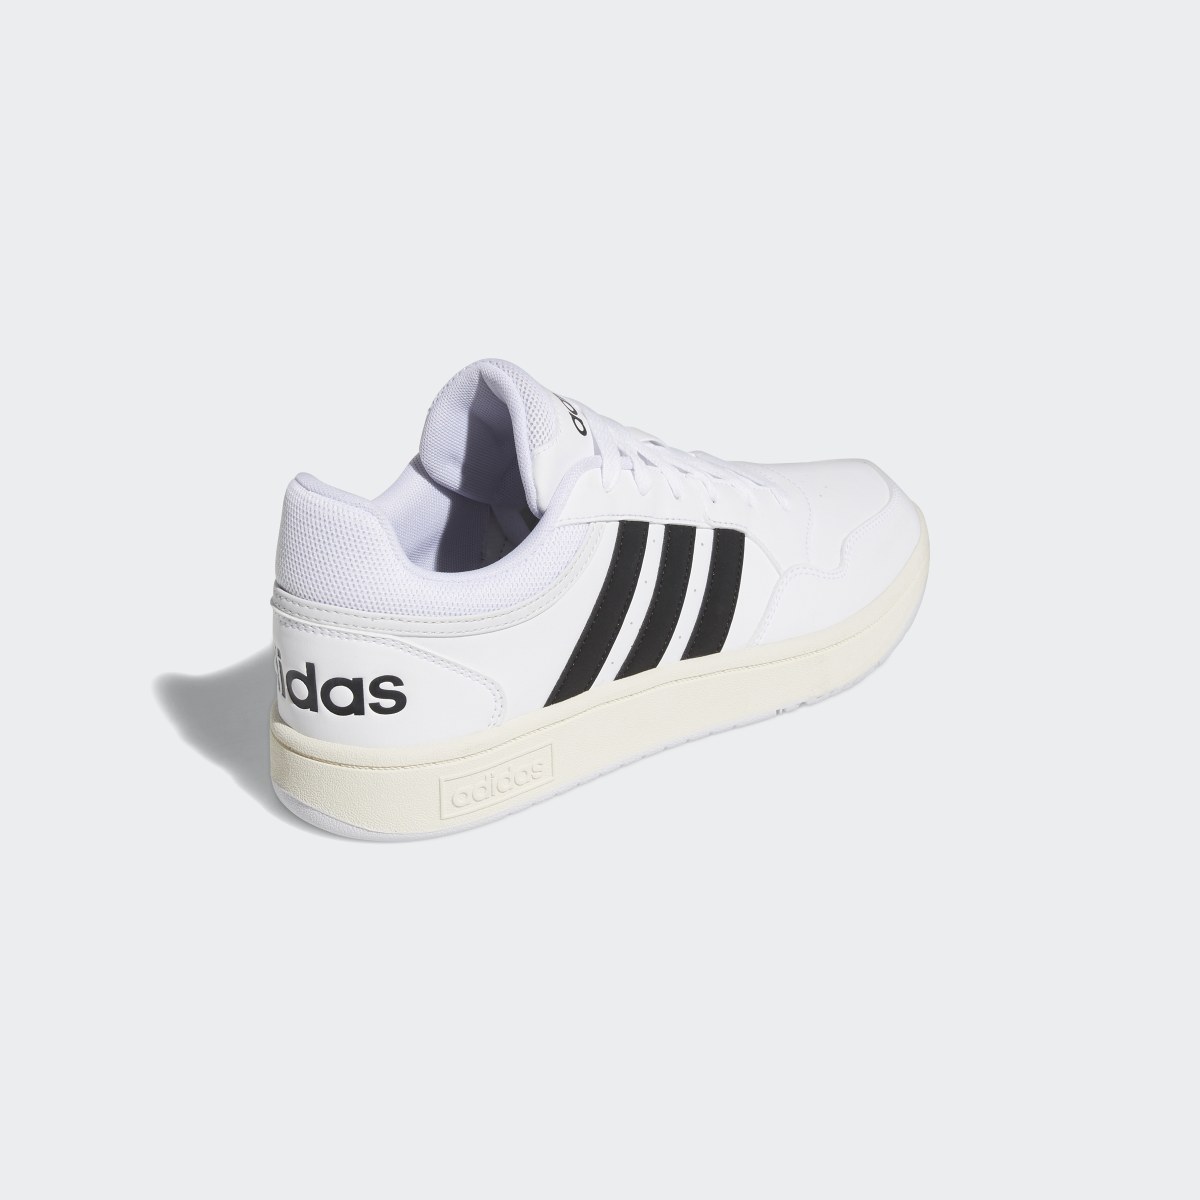 Adidas Hoops 3.0 Low Classic Vintage Shoes. 6